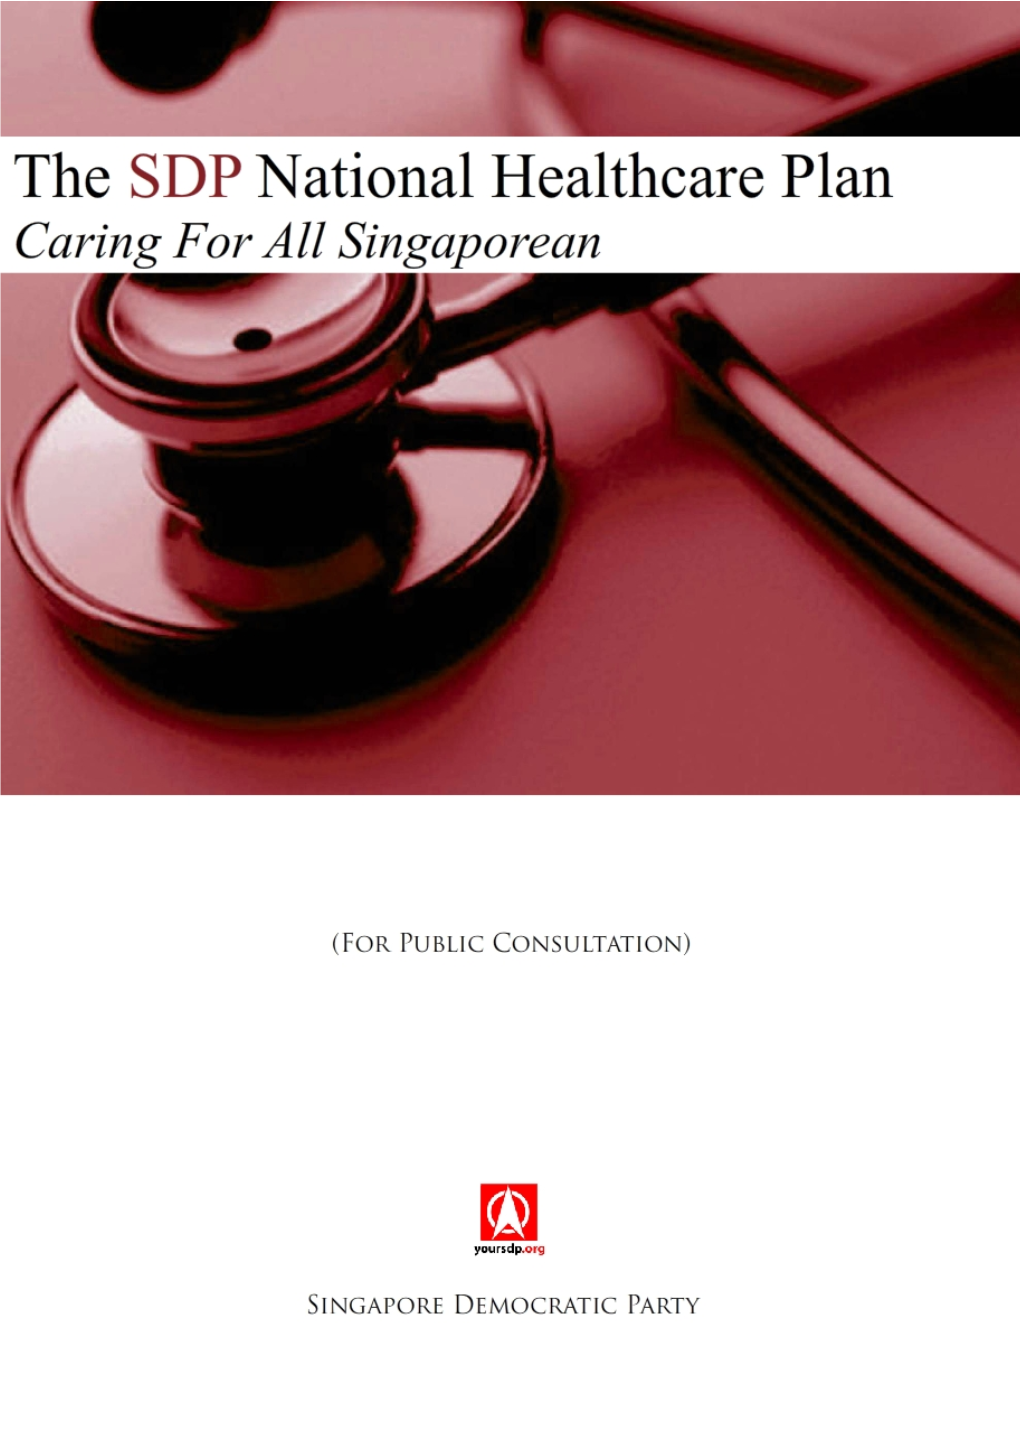 Healthcare Spending Healthcare Indicators Singapore Healthcare: a Broken System? Recent Healthcare Changes – Too Little, Too Late? Budget 2012